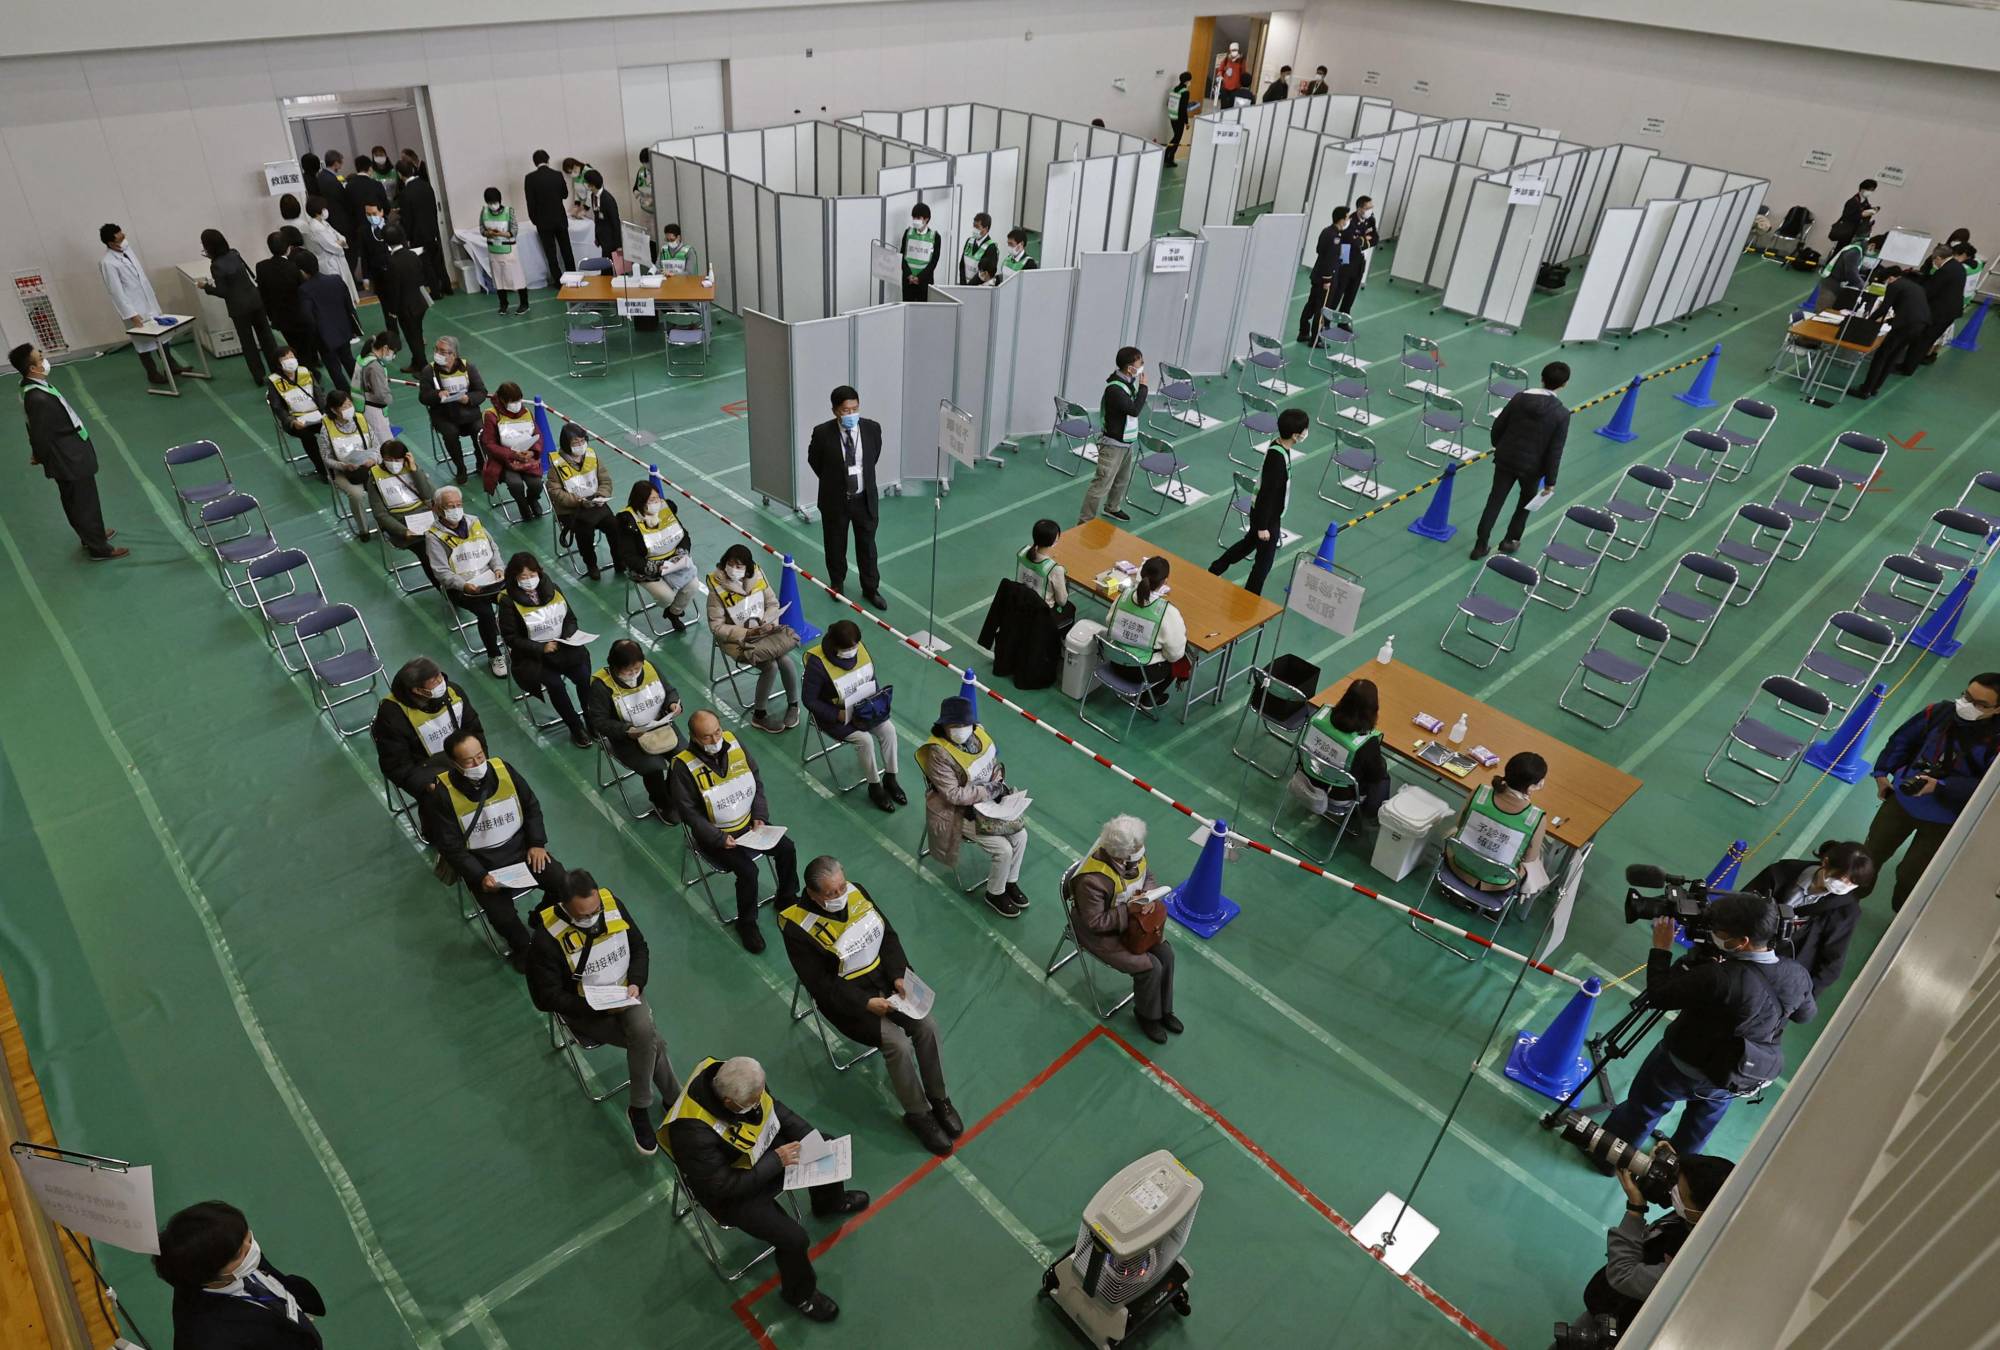 Social distancing measures are taken, with partitions set up to separate participants, during a coronavirus vaccination simulation held at a university gymnasium in Kawasaki on Wednesday. | KYODO